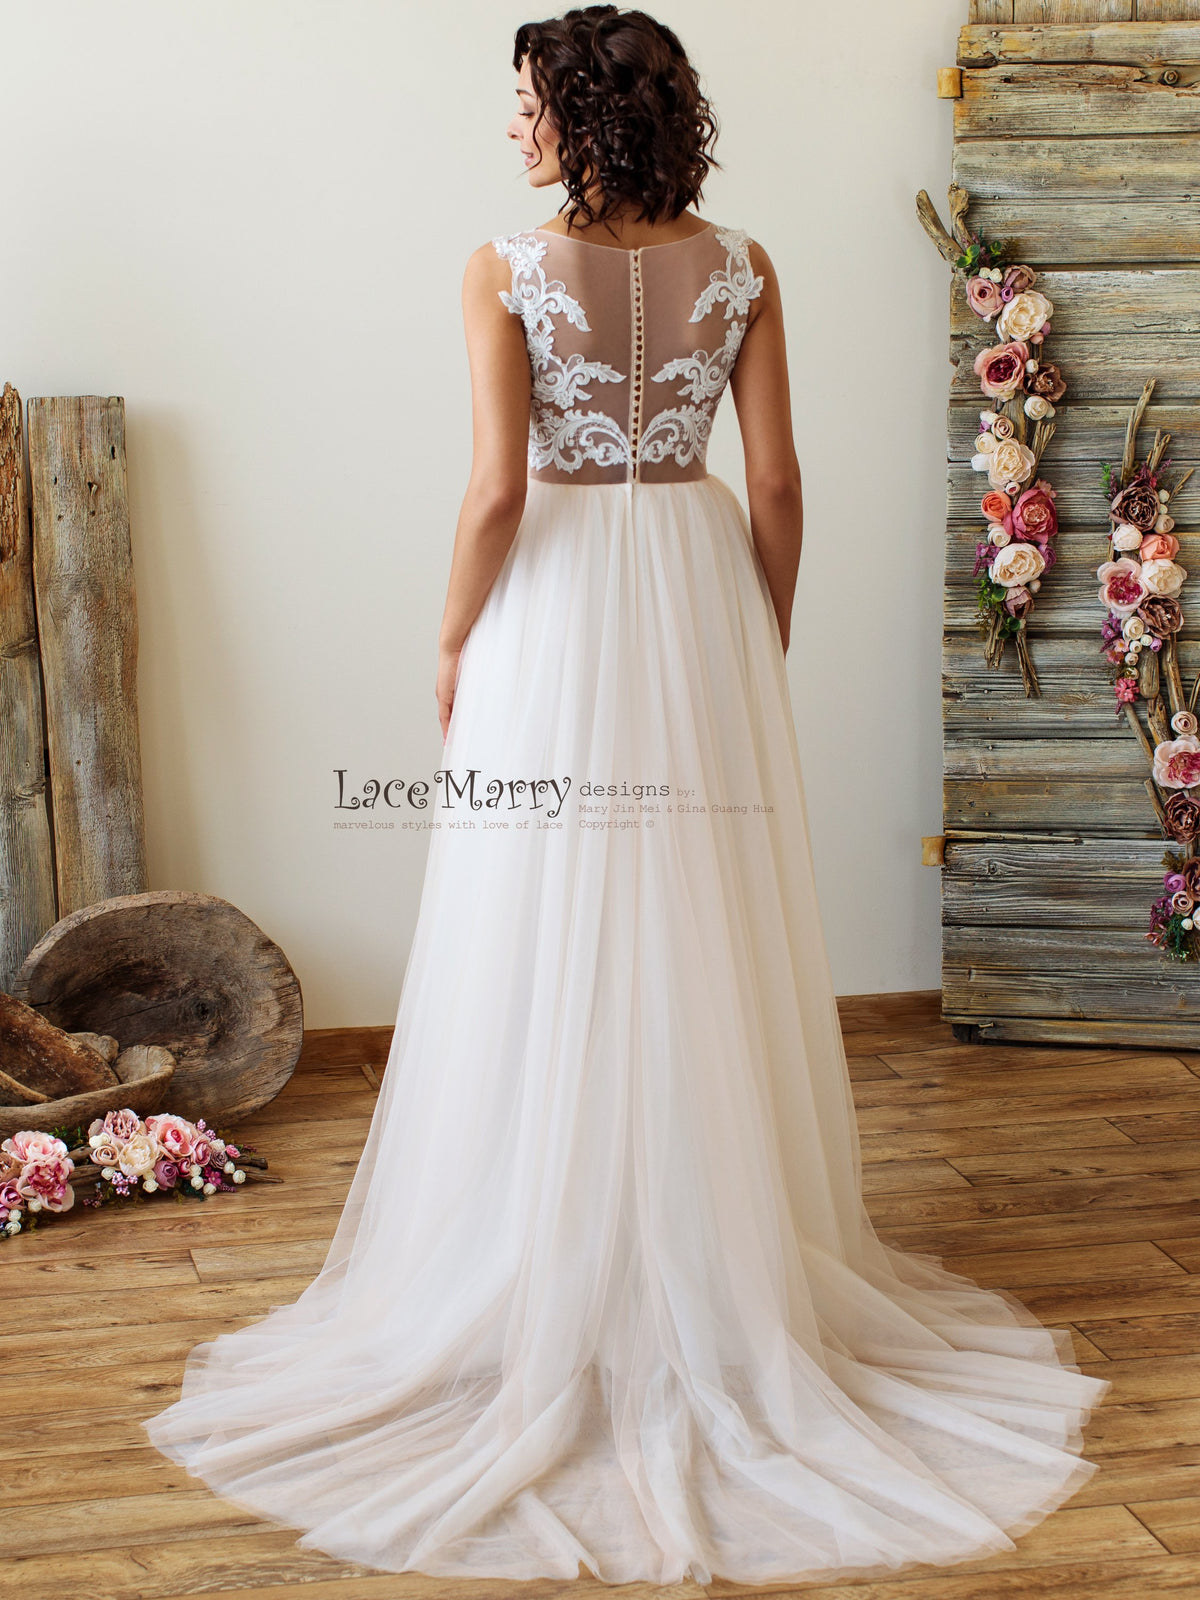 Illusion Back Wedding Dress with Ombre Skirt